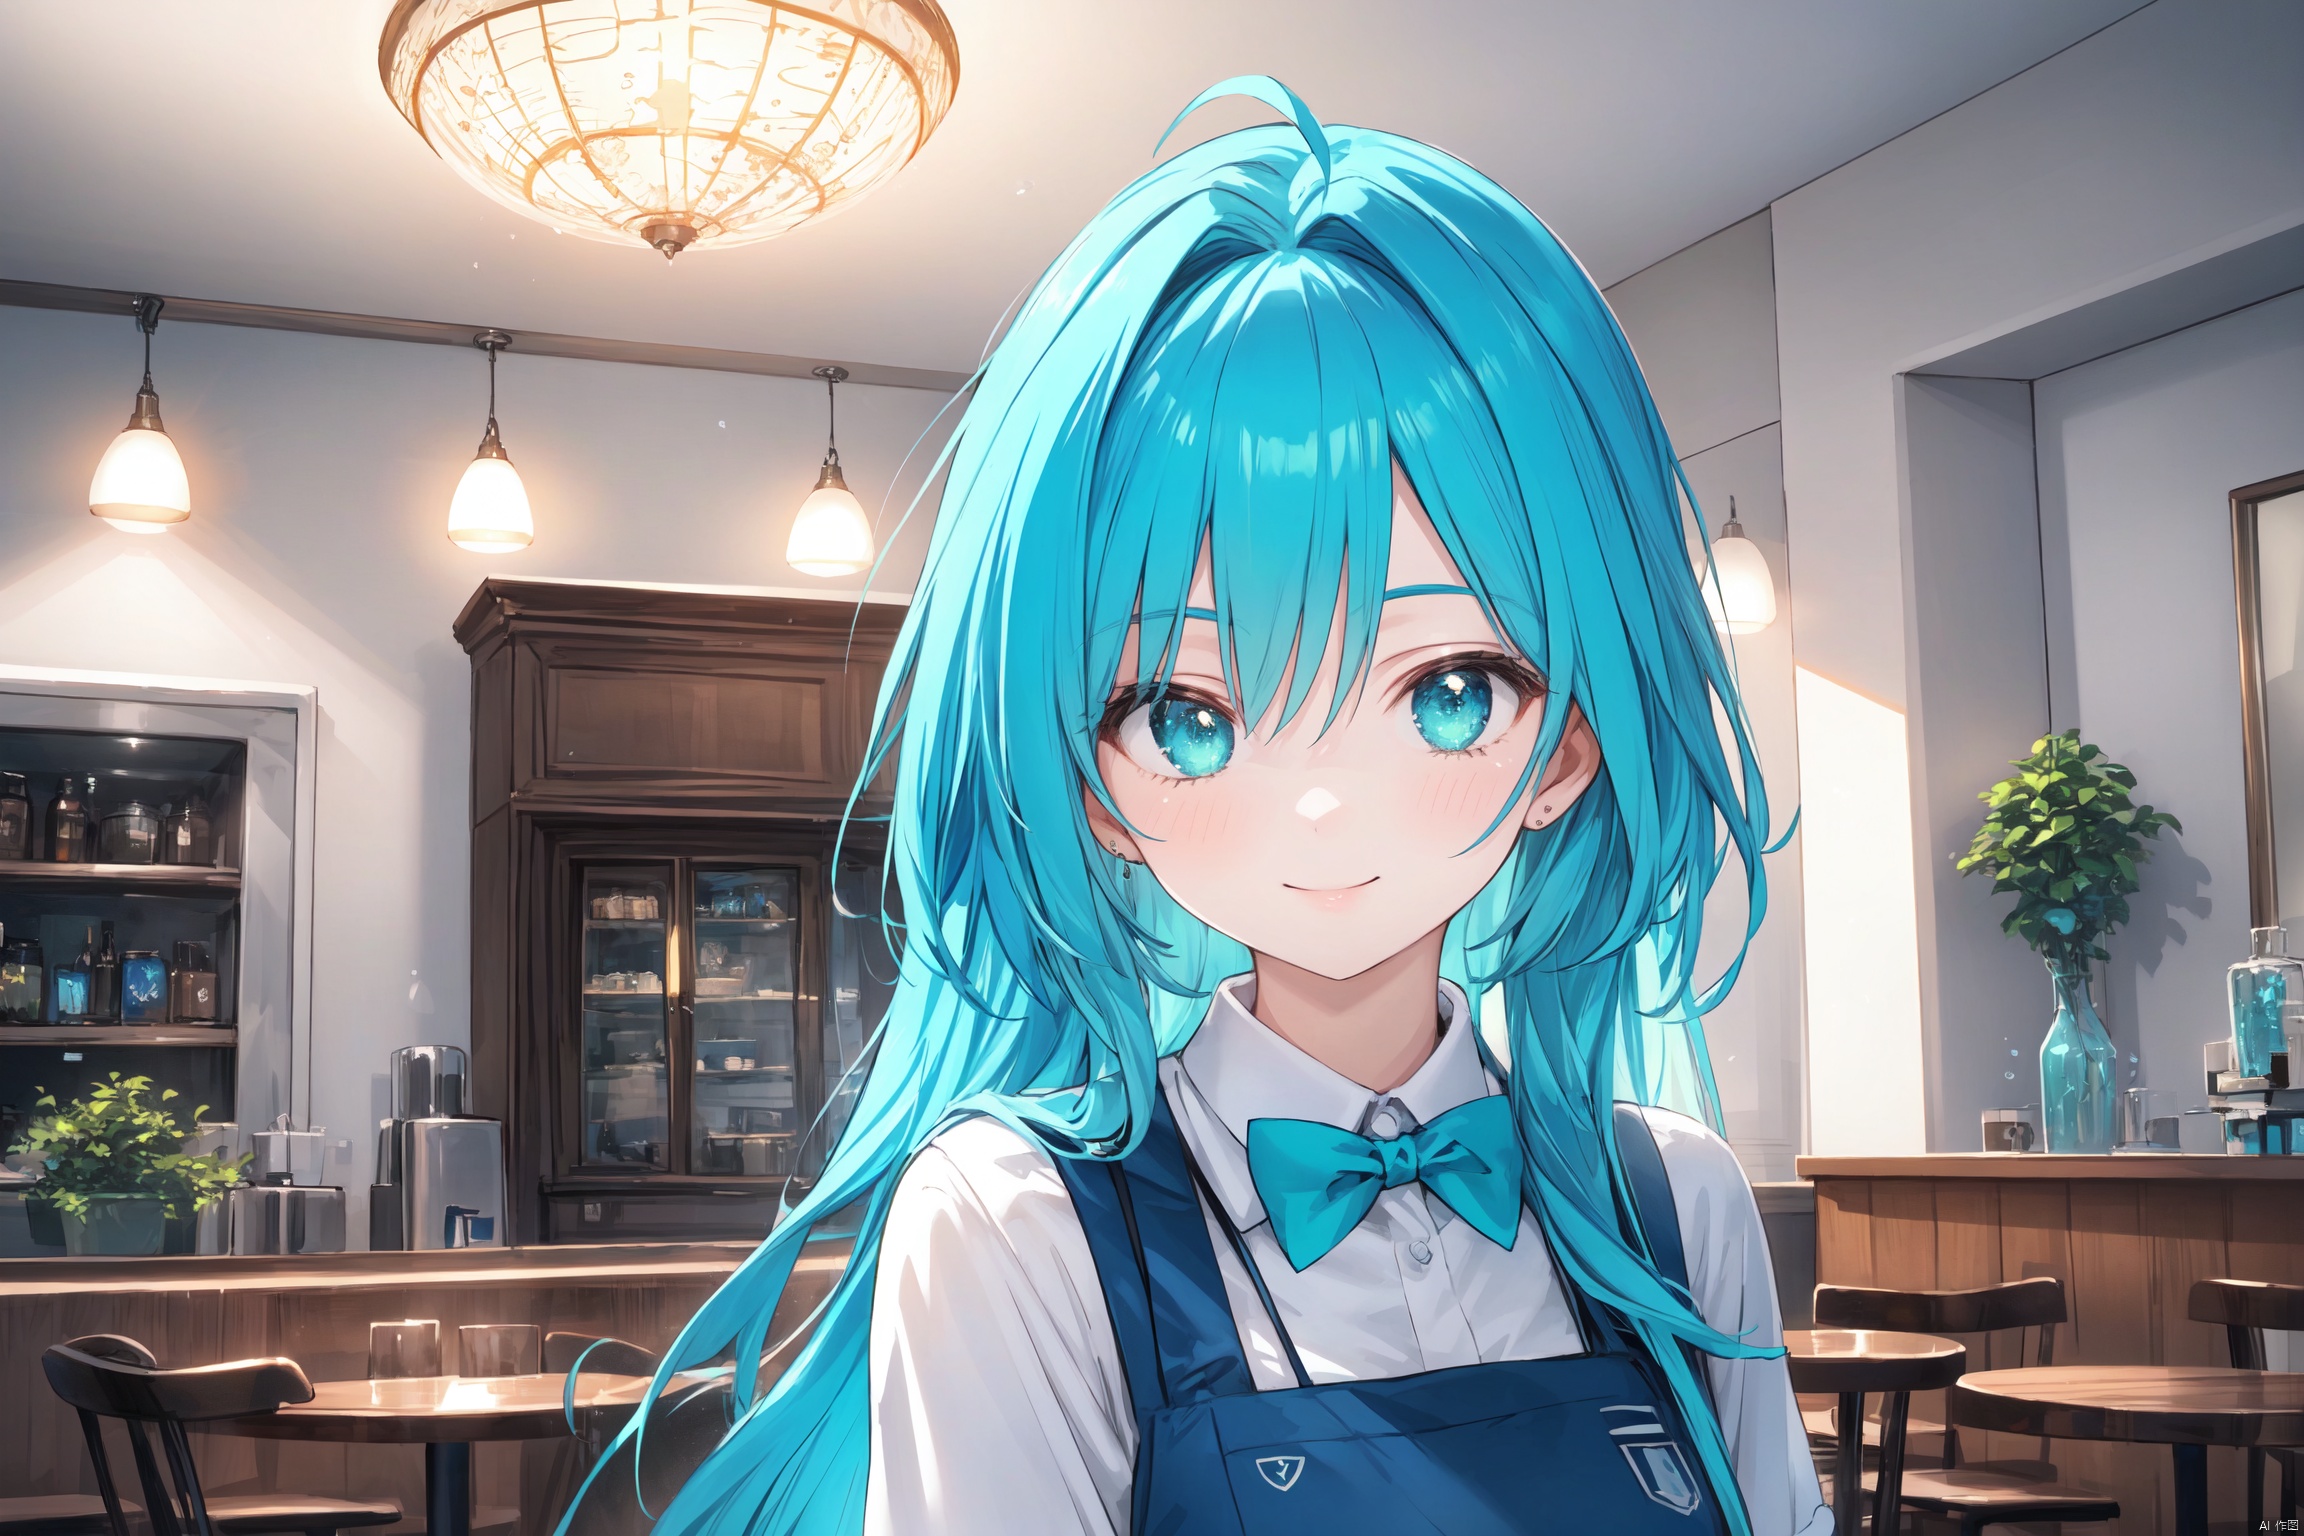  masterpiece, high quality, 8K, high resolution, ultra-detailed, anime, natural lighting, ultra detailed skin, ultra detailed face, cinematic style, stylish, A female waitress at a trendy underwater cafe, face shot, perspective: eye-level, (3girls female staff, smiling, standing), customer, elegant, serene, aquatic, intimate, modern, soft lighting, blue-green tones, (hospitality:1.3), setting: submerged, decor: chic, mood: welcoming, ambiance: tranquil, interaction: guiding, clothing: fashionable uniform, posture: attentive, environment: marine-themed, texture: fluid, lighting: ambient, expression: professional